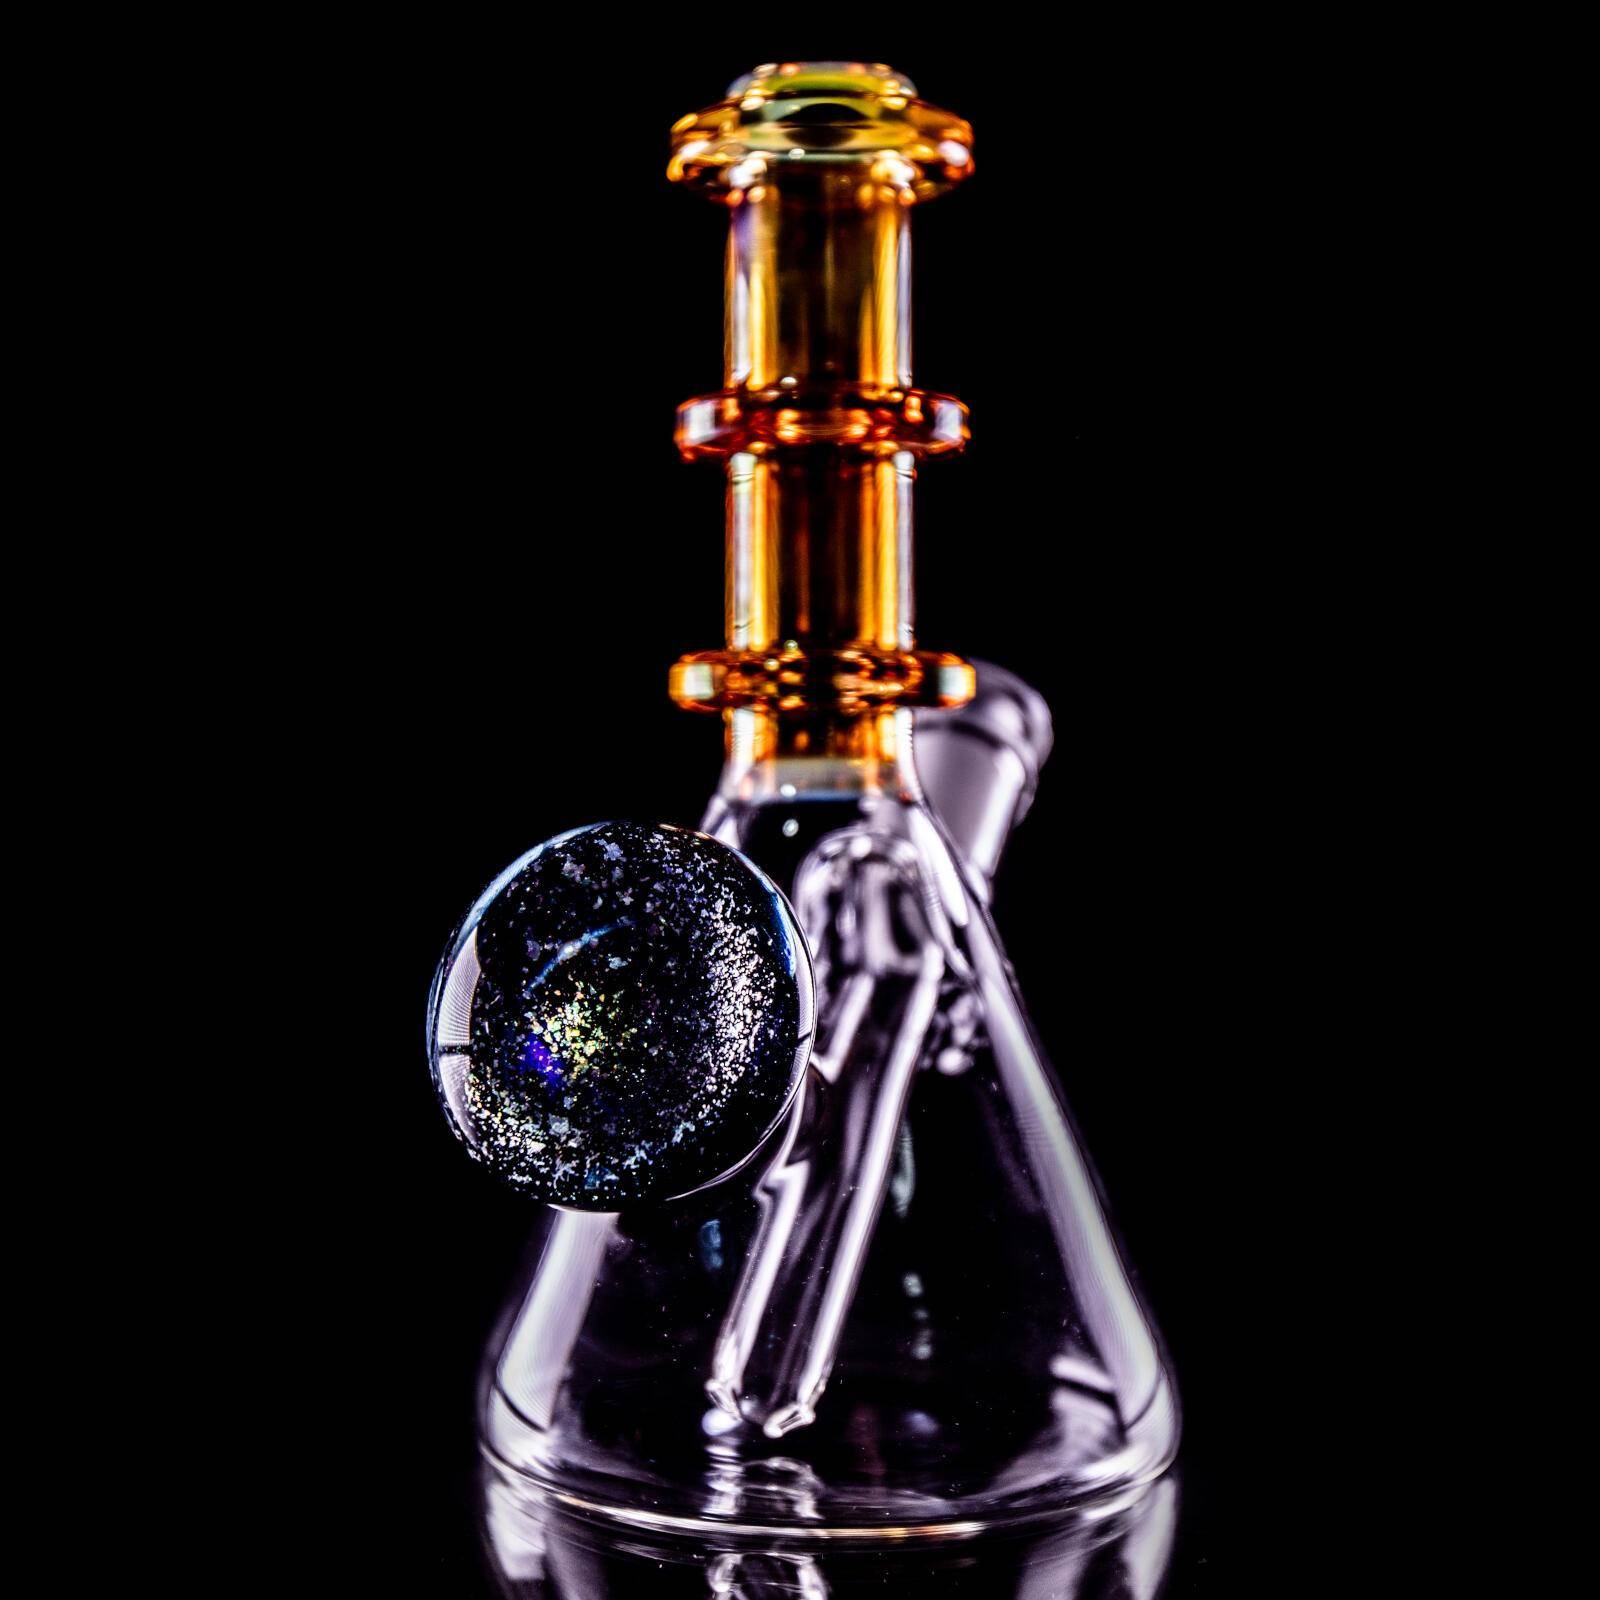 Gold Neck Implosion Rig